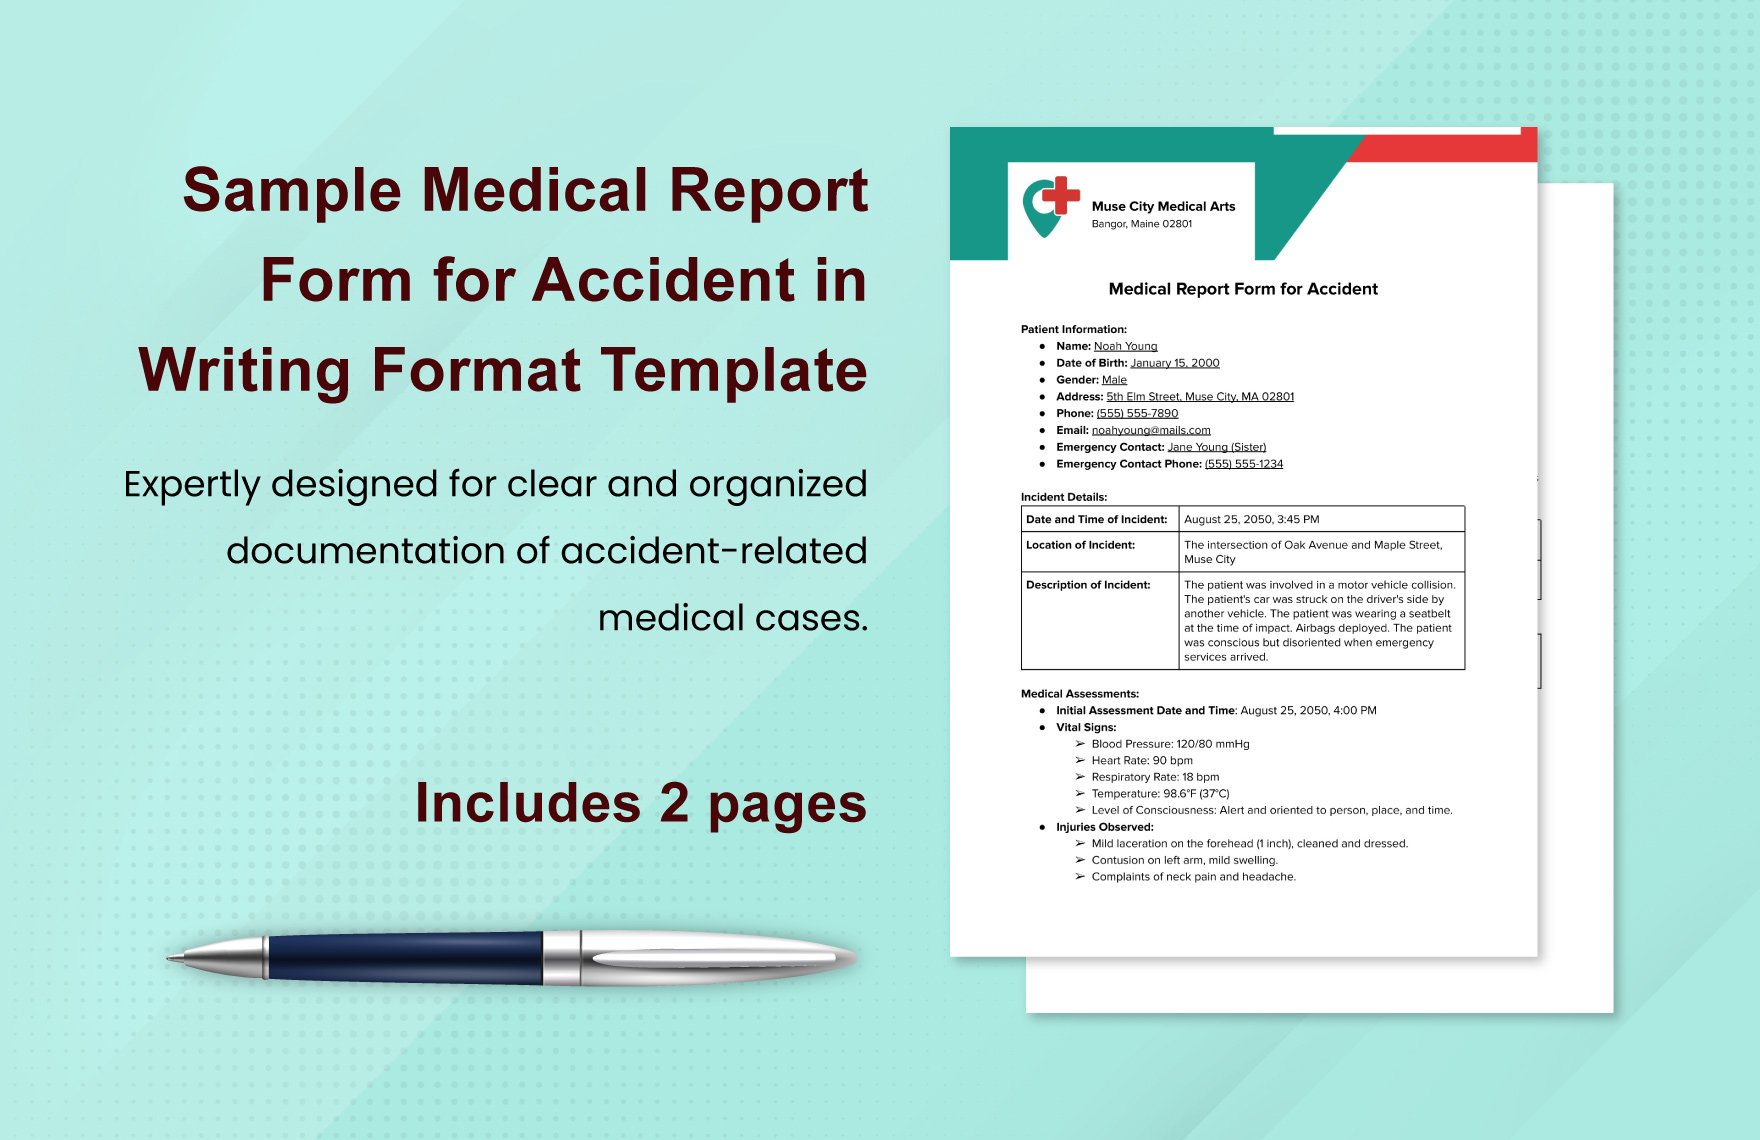 Sample Medical Report Form for Accident in Writing Format Template